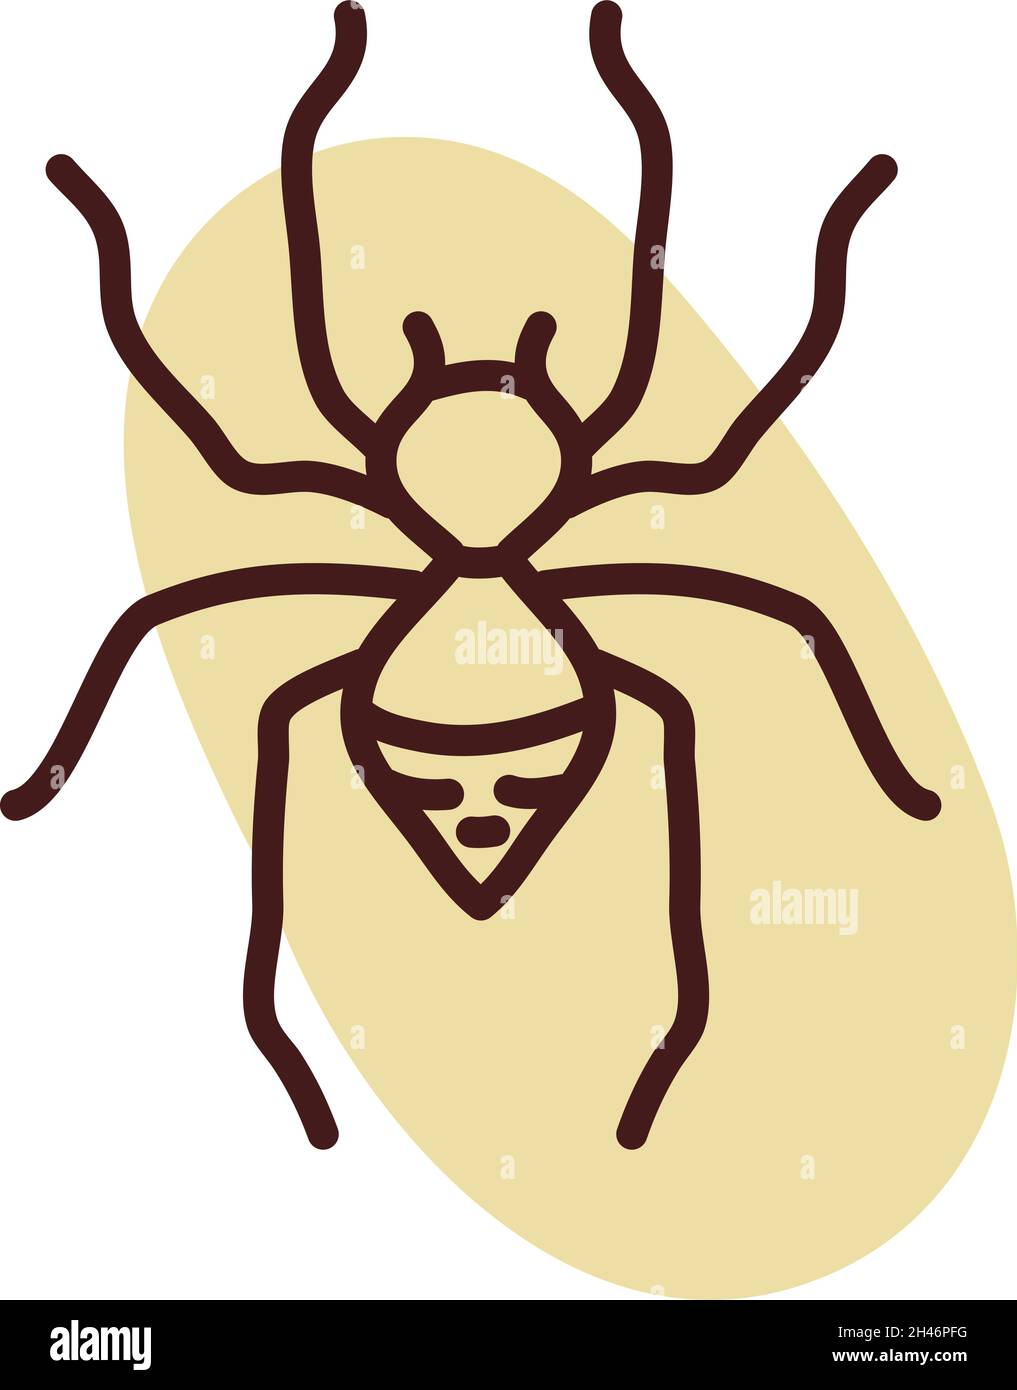 Big spider, illustration, vector, on a white background. Stock Vector